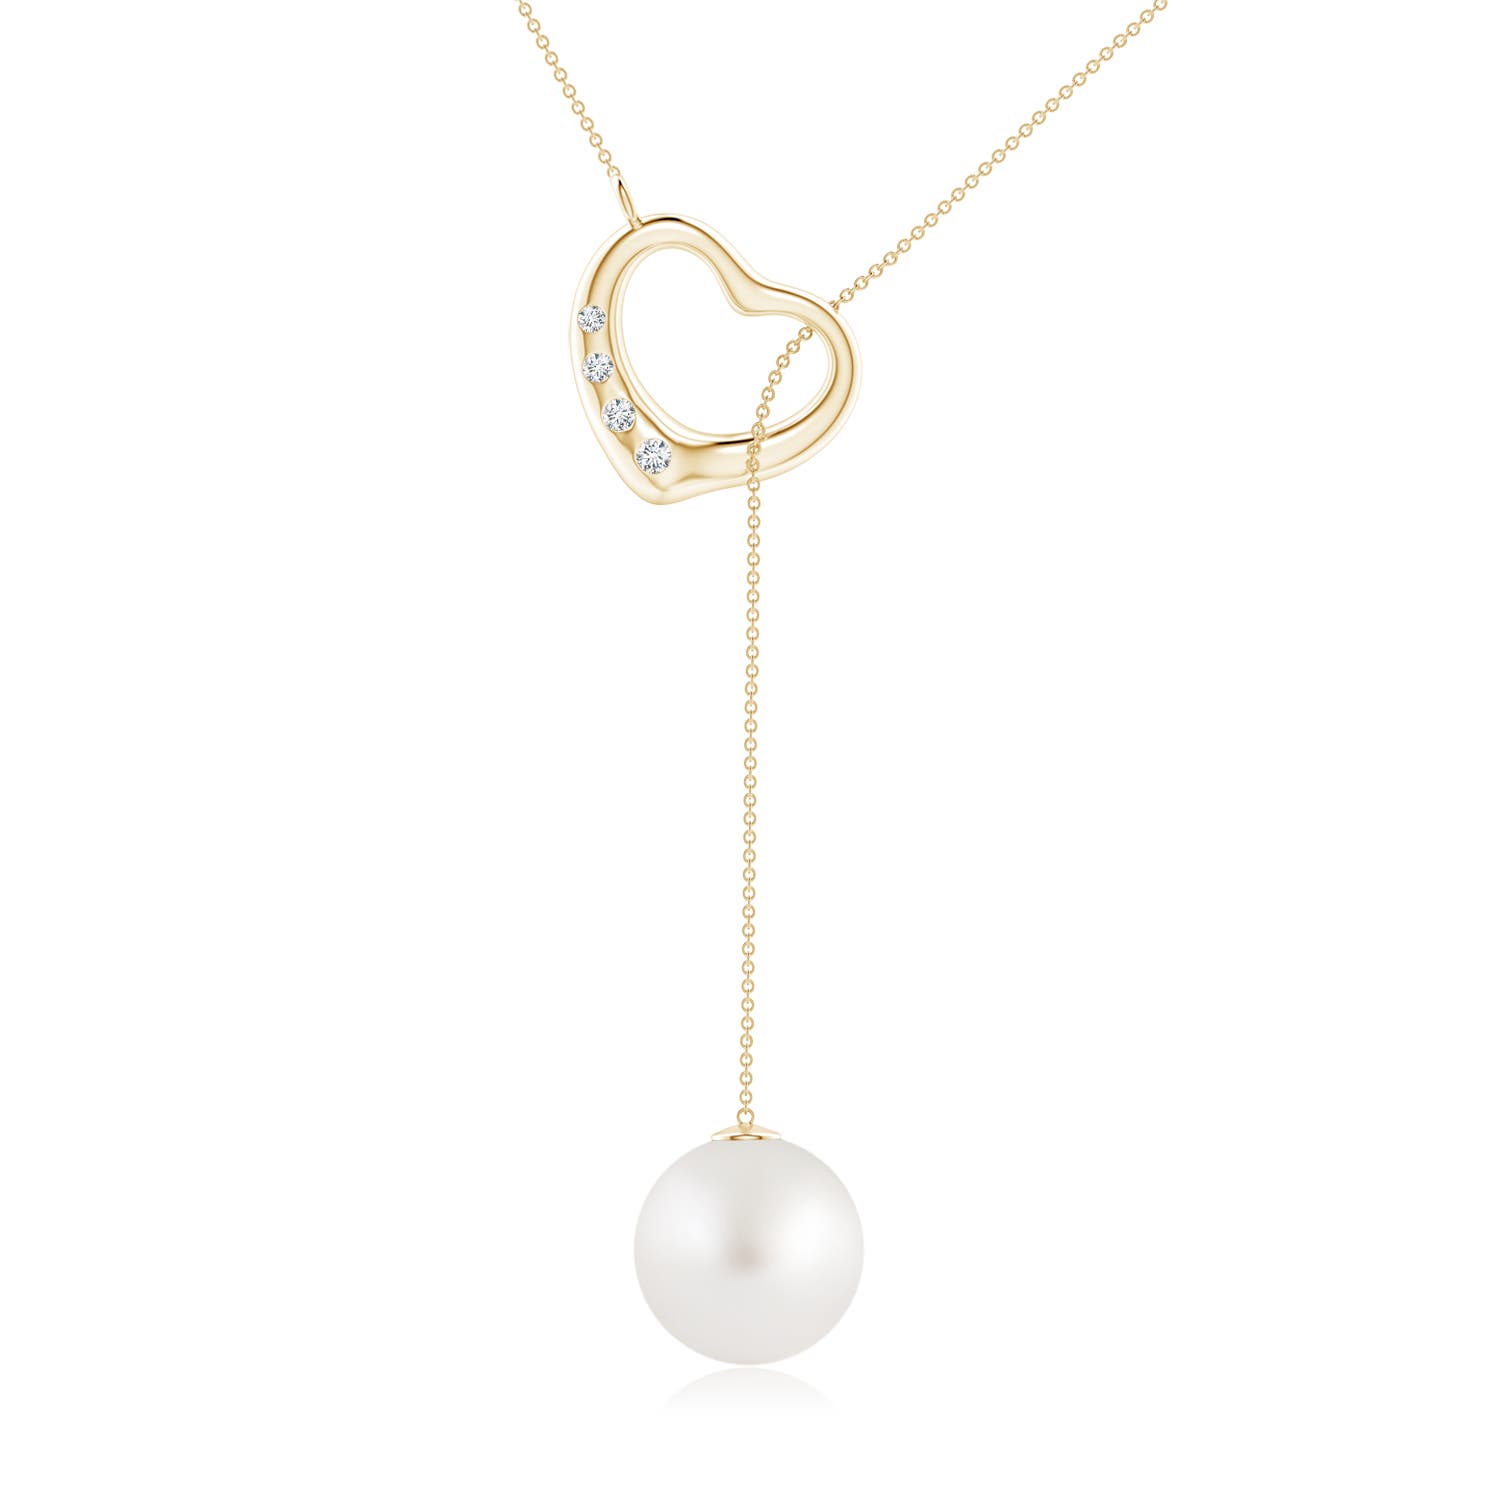 AA - South Sea Cultured Pearl / 7.23 CT / 14 KT Yellow Gold